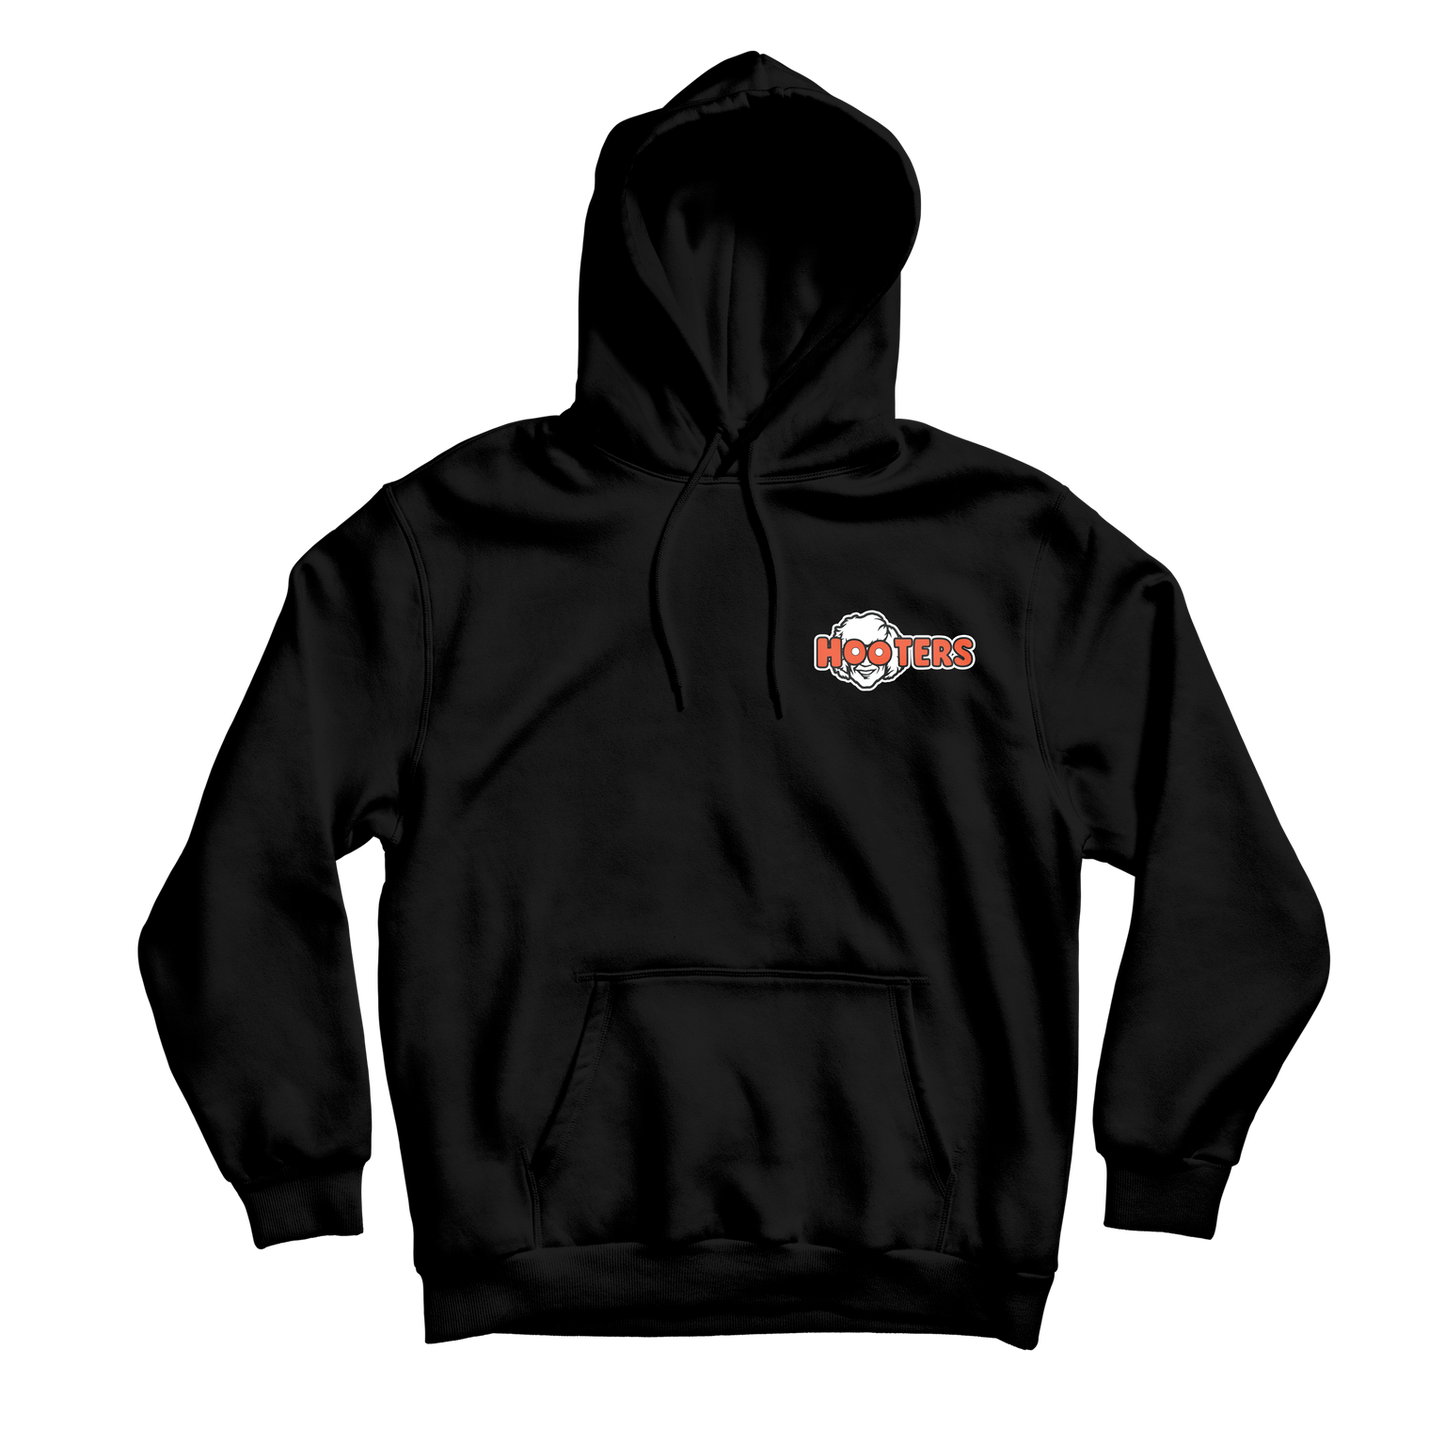 Danny Duncan x Hooters Embroidered Black Hoodie